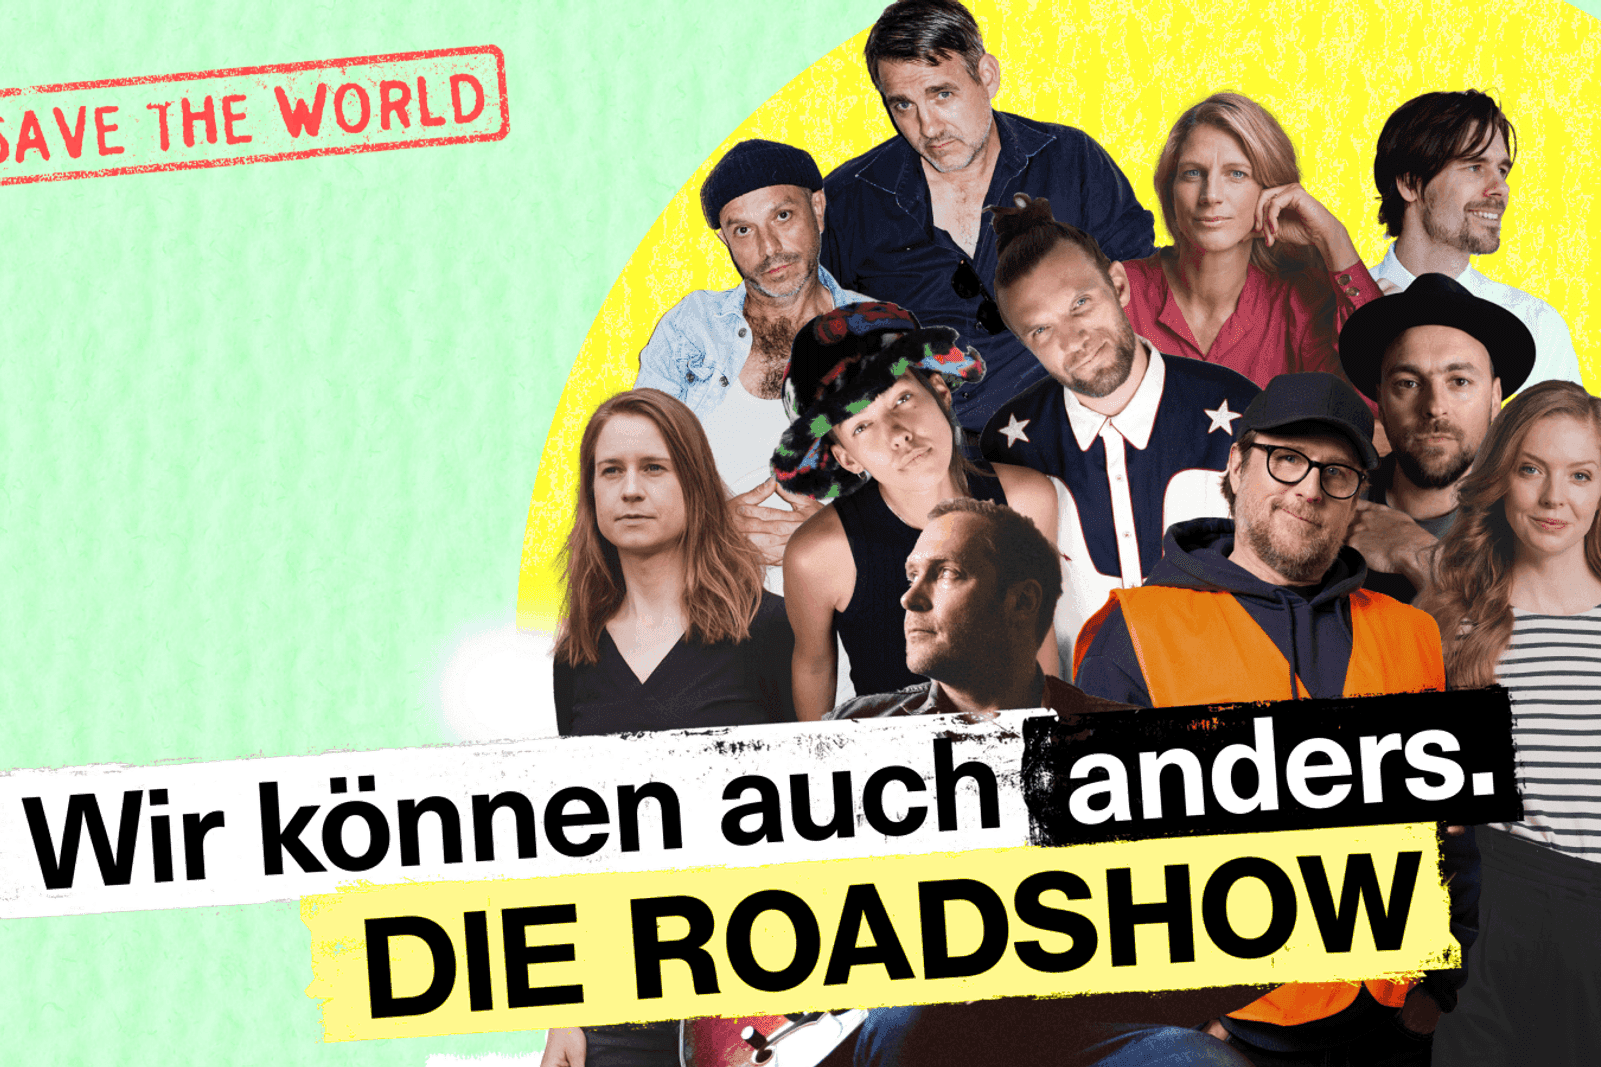 There is a bunch of people who are photoshopped together on a yellow background. In the foreground is a banner with the name of the roadshow: "Wir können auch anders"